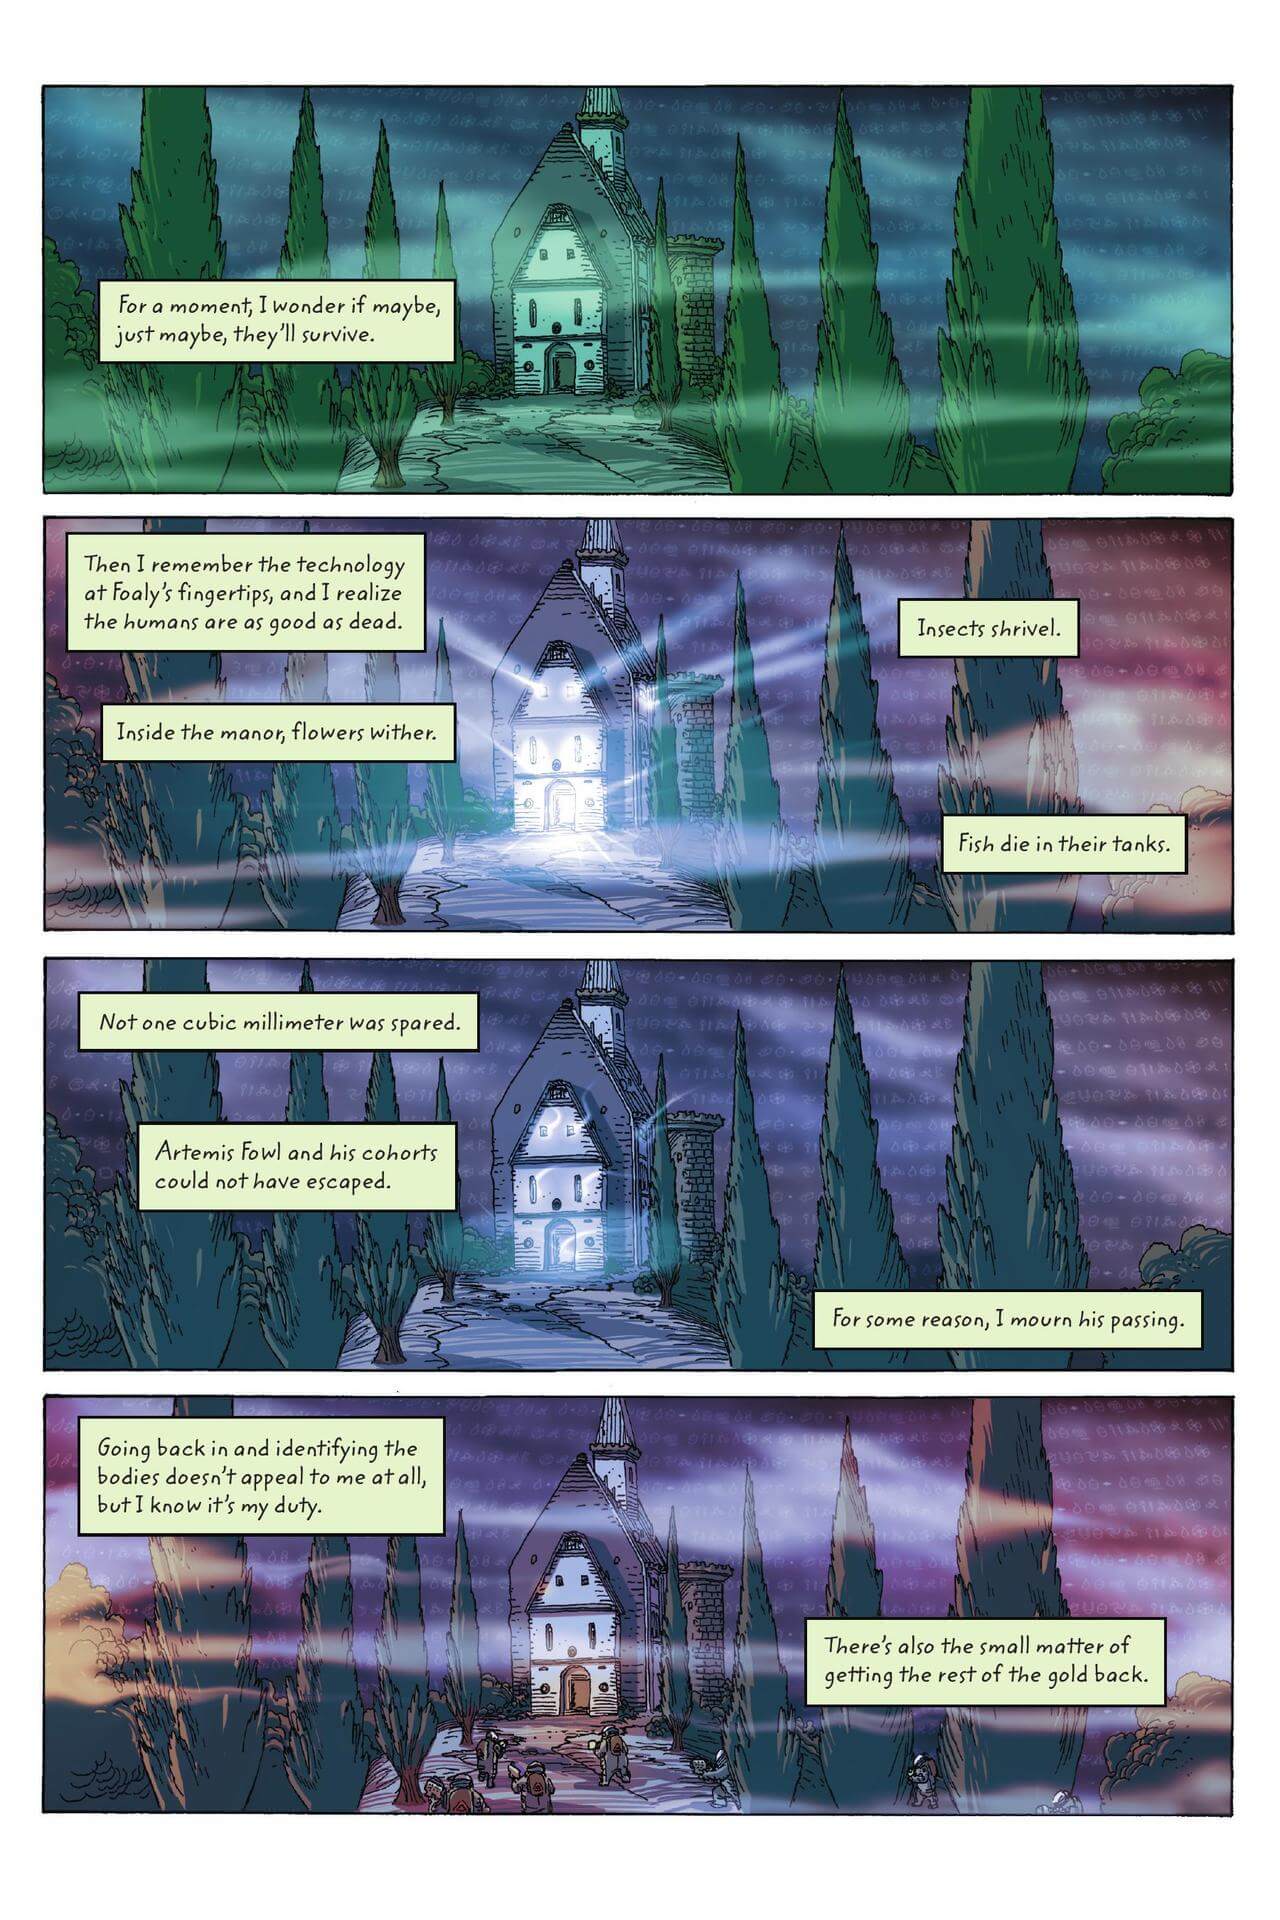 page 105 of artemis fowl the graphic novel